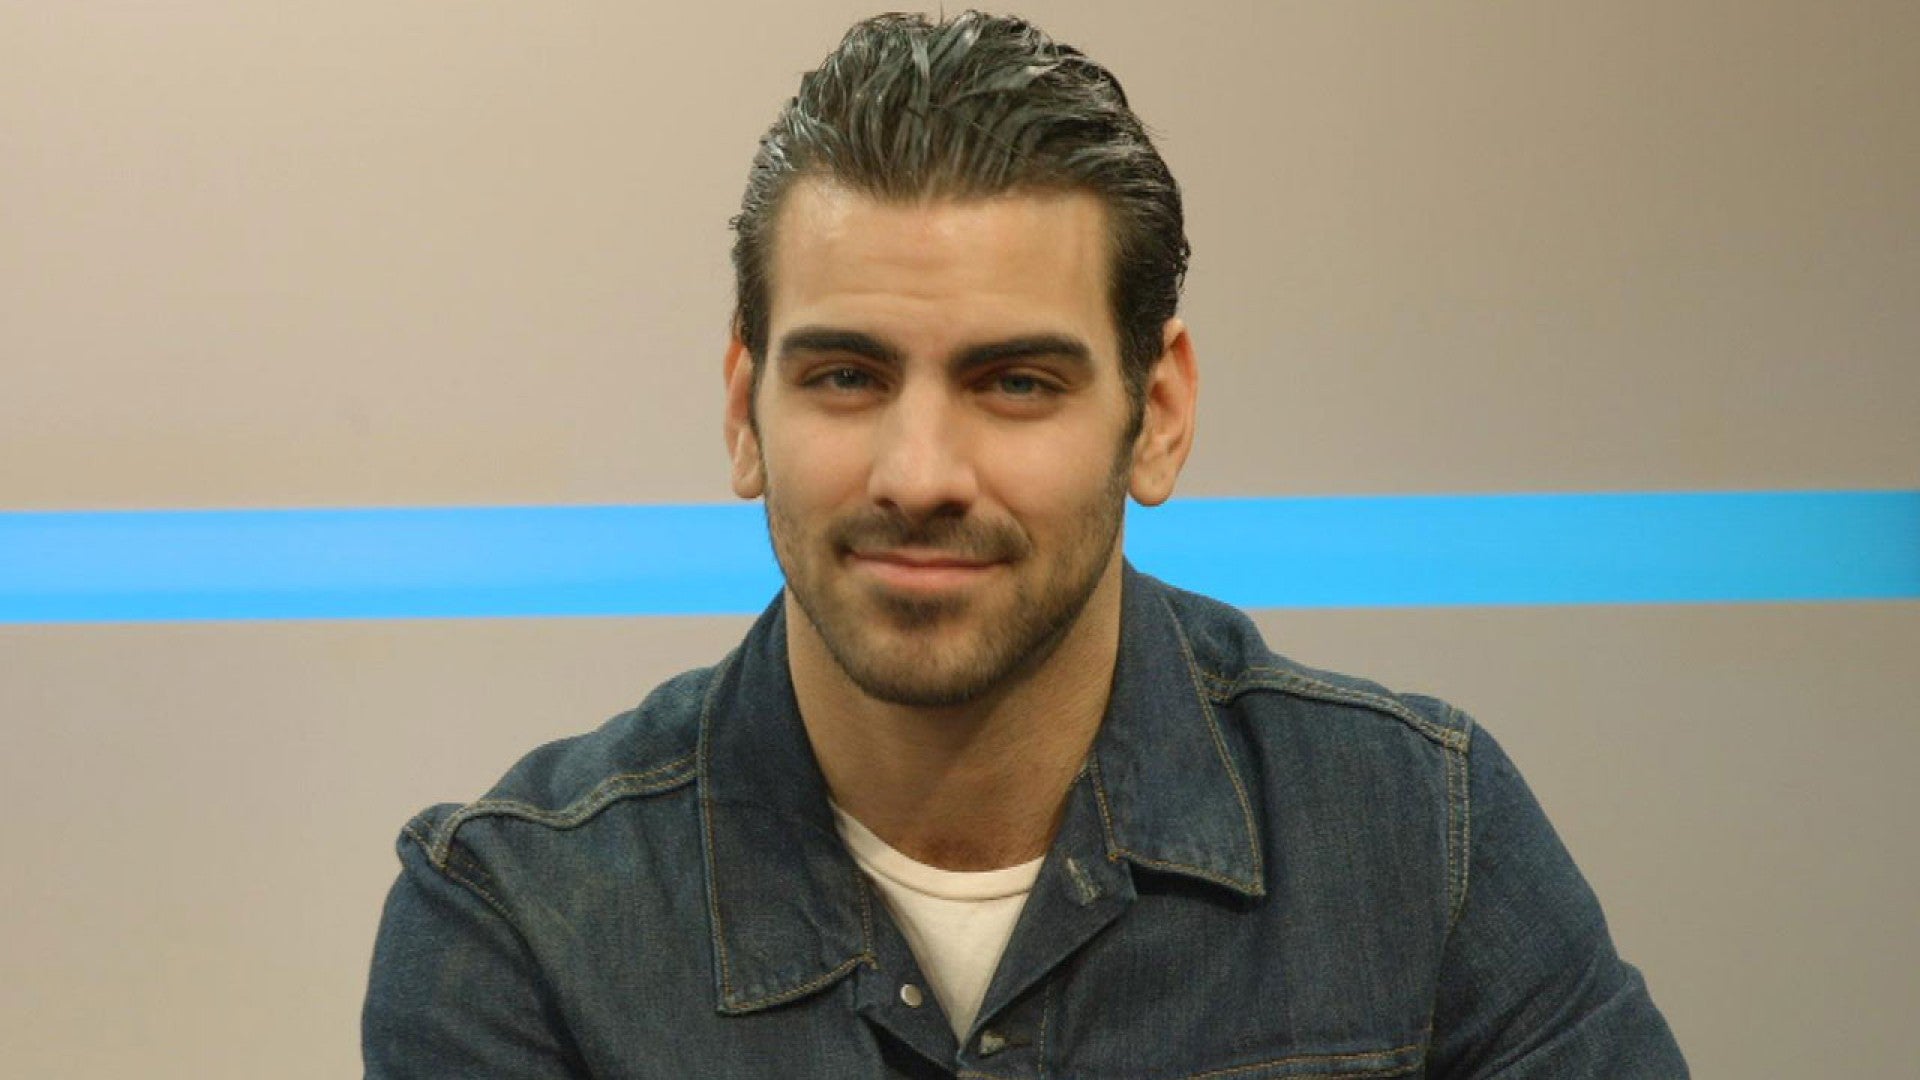 Nyle Dimarco Wallpapers